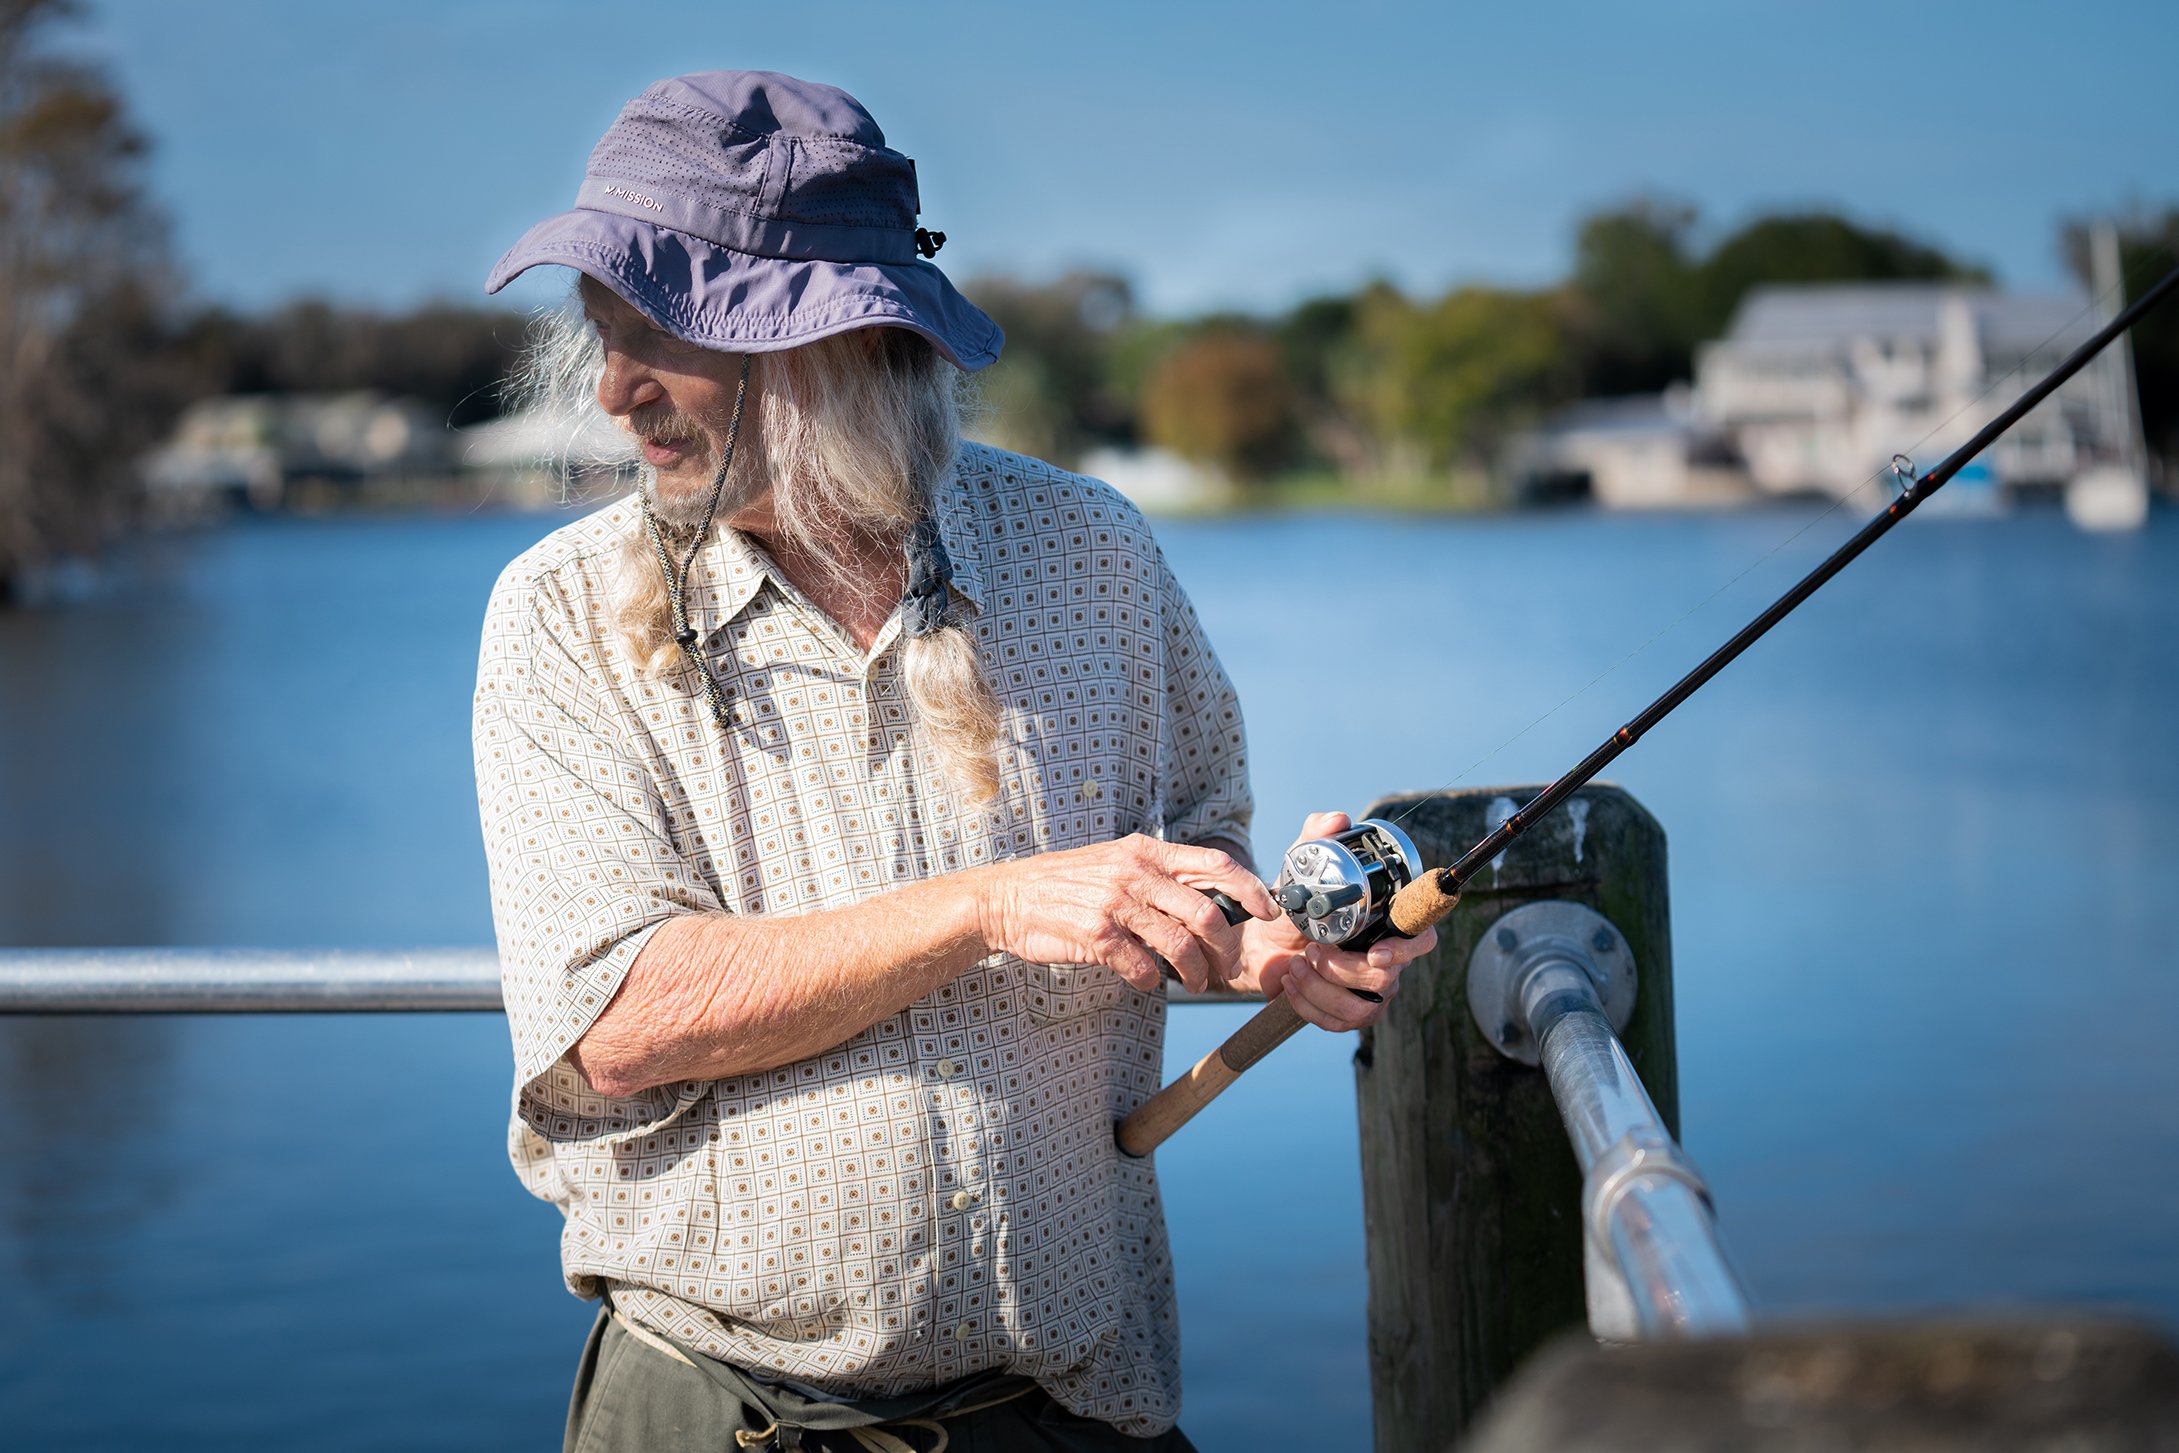   Mike fishing at the Kings Bay Park where he occasionally gets some fresh fish to cook up for the communities of abandoned cats that he cares for in Crystal River.  